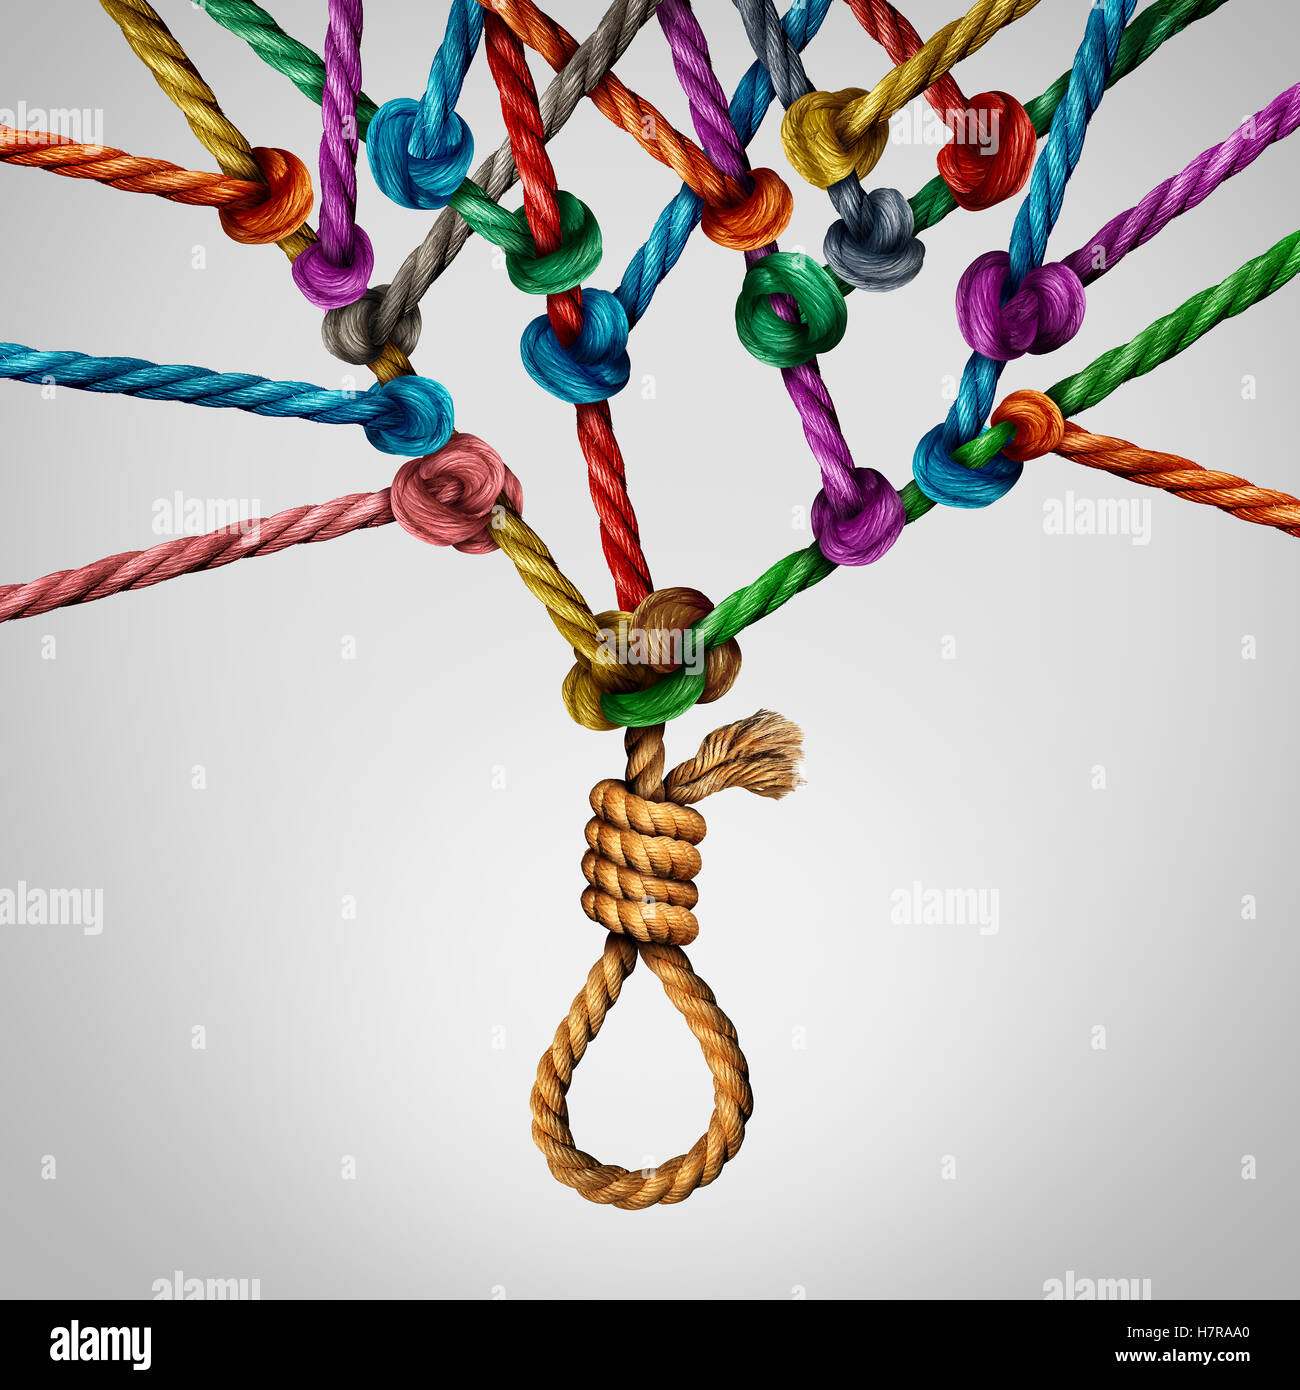 Social suicide concept as a sociology metaphor for crowd or herd mentality and group decisions resulting in violence or population death as a network of connected ropes tied together with a noose at the root of the institution. Stock Photo